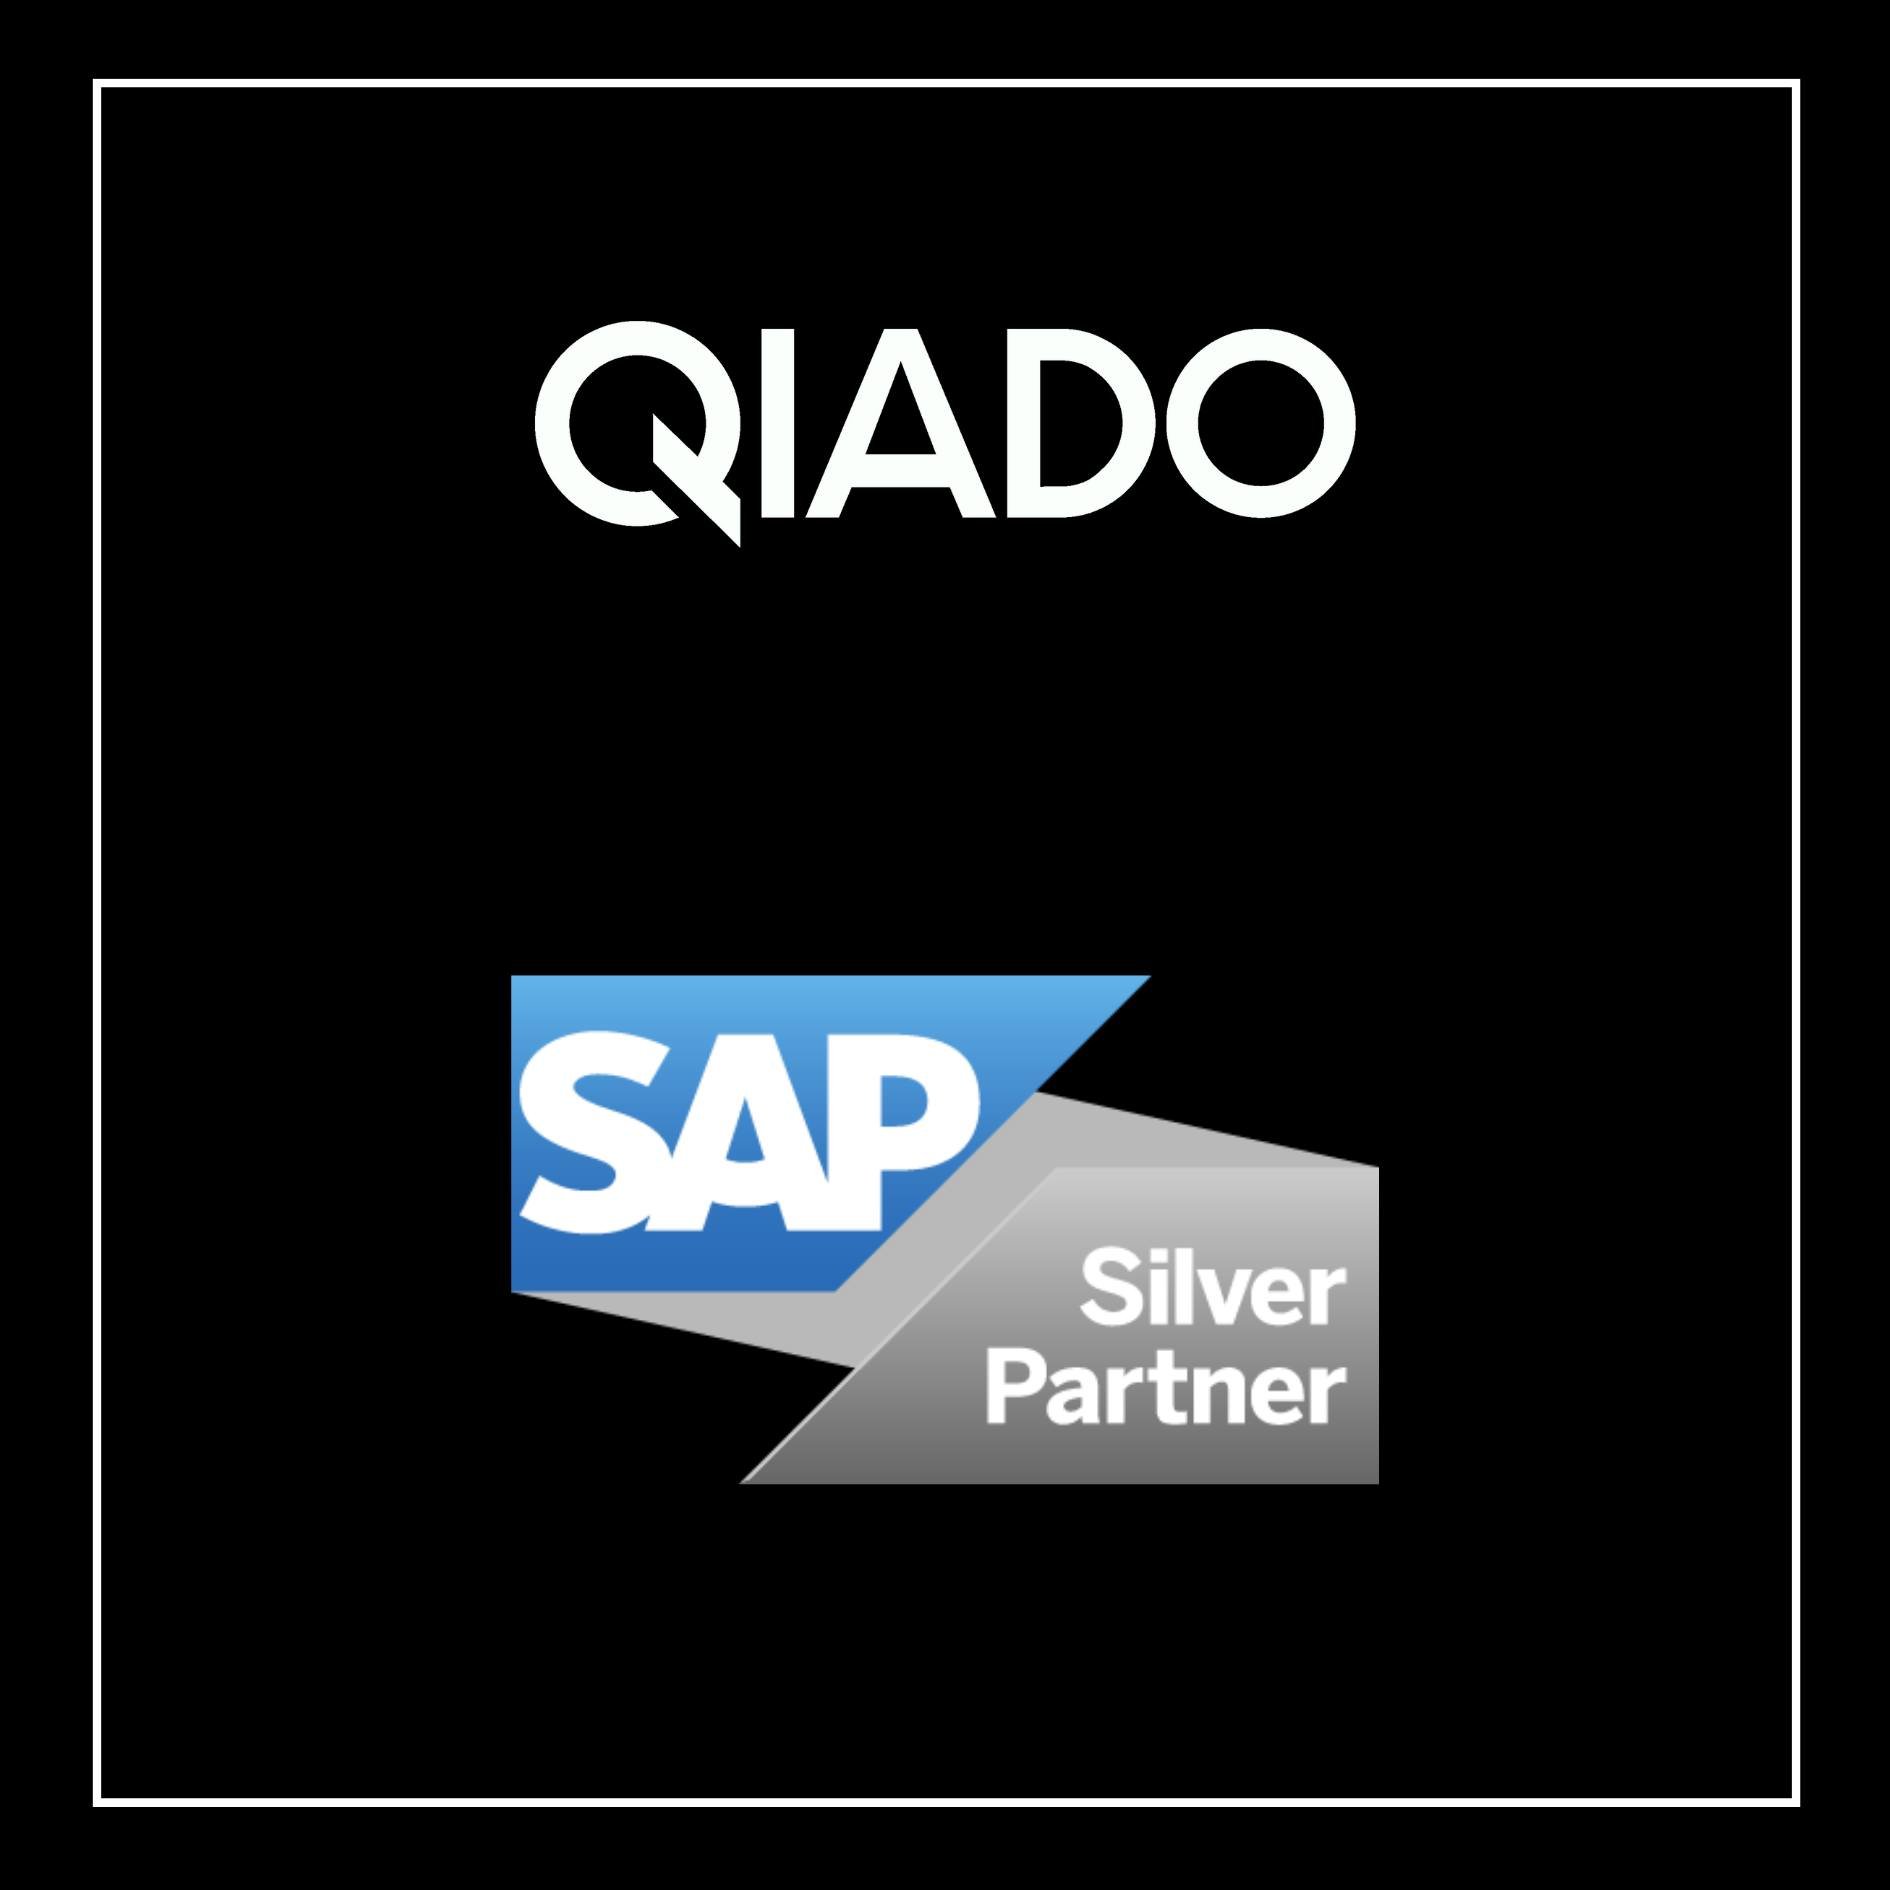 The #SAP Silver Partner status recognizes Qiado's deep experience and expertise 🏅 We are proud to keep a close and trustful relationship with the global leader in software solutions!

Together, we empower businesses by driving transformative digital